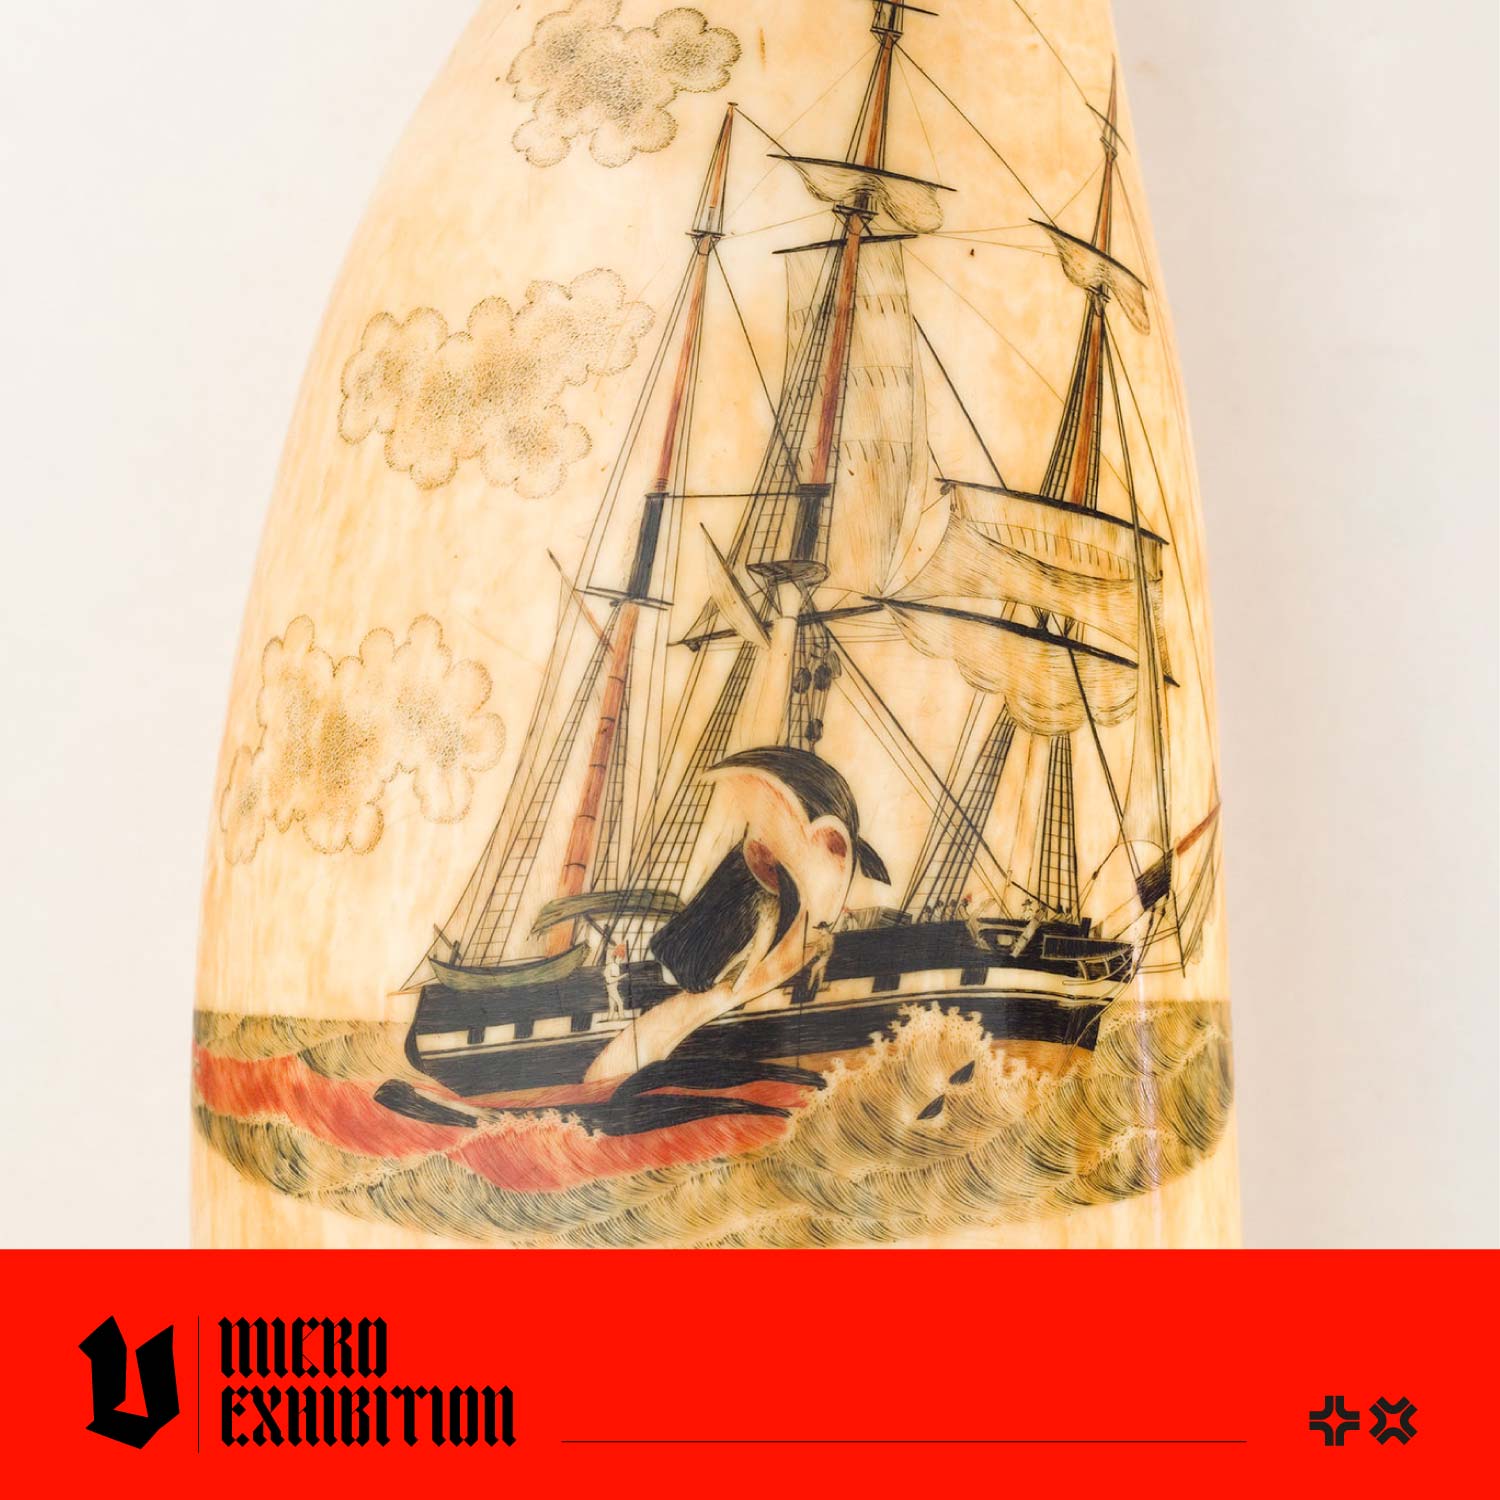 The Art of Etching Stories: Delving into the Fascinating World of Scrimshaw